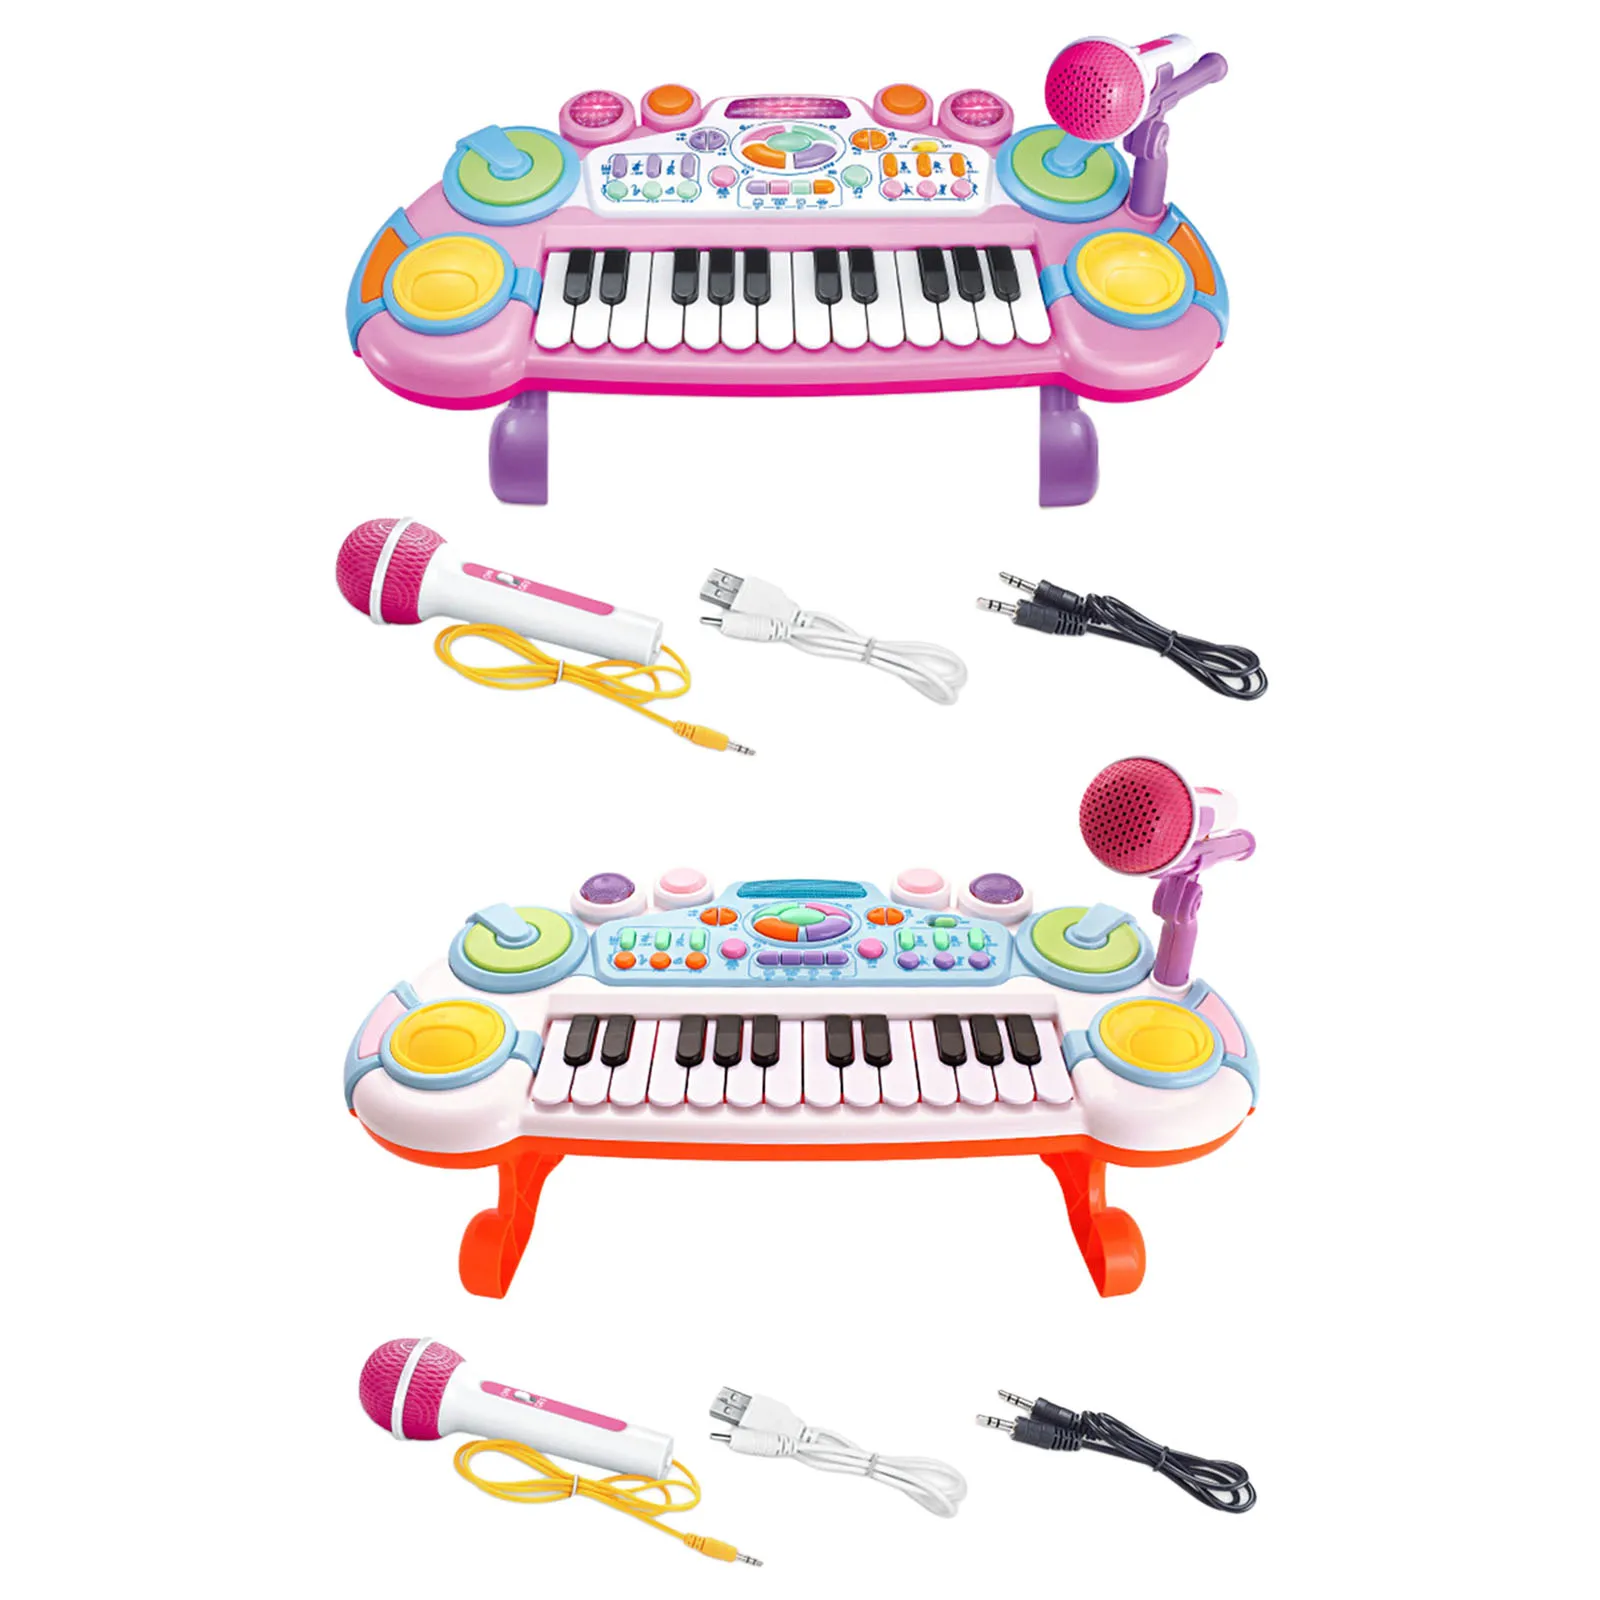 Mini Electronic Keyboard Piano For Baby Kids Educational Musical Toy Instruments 